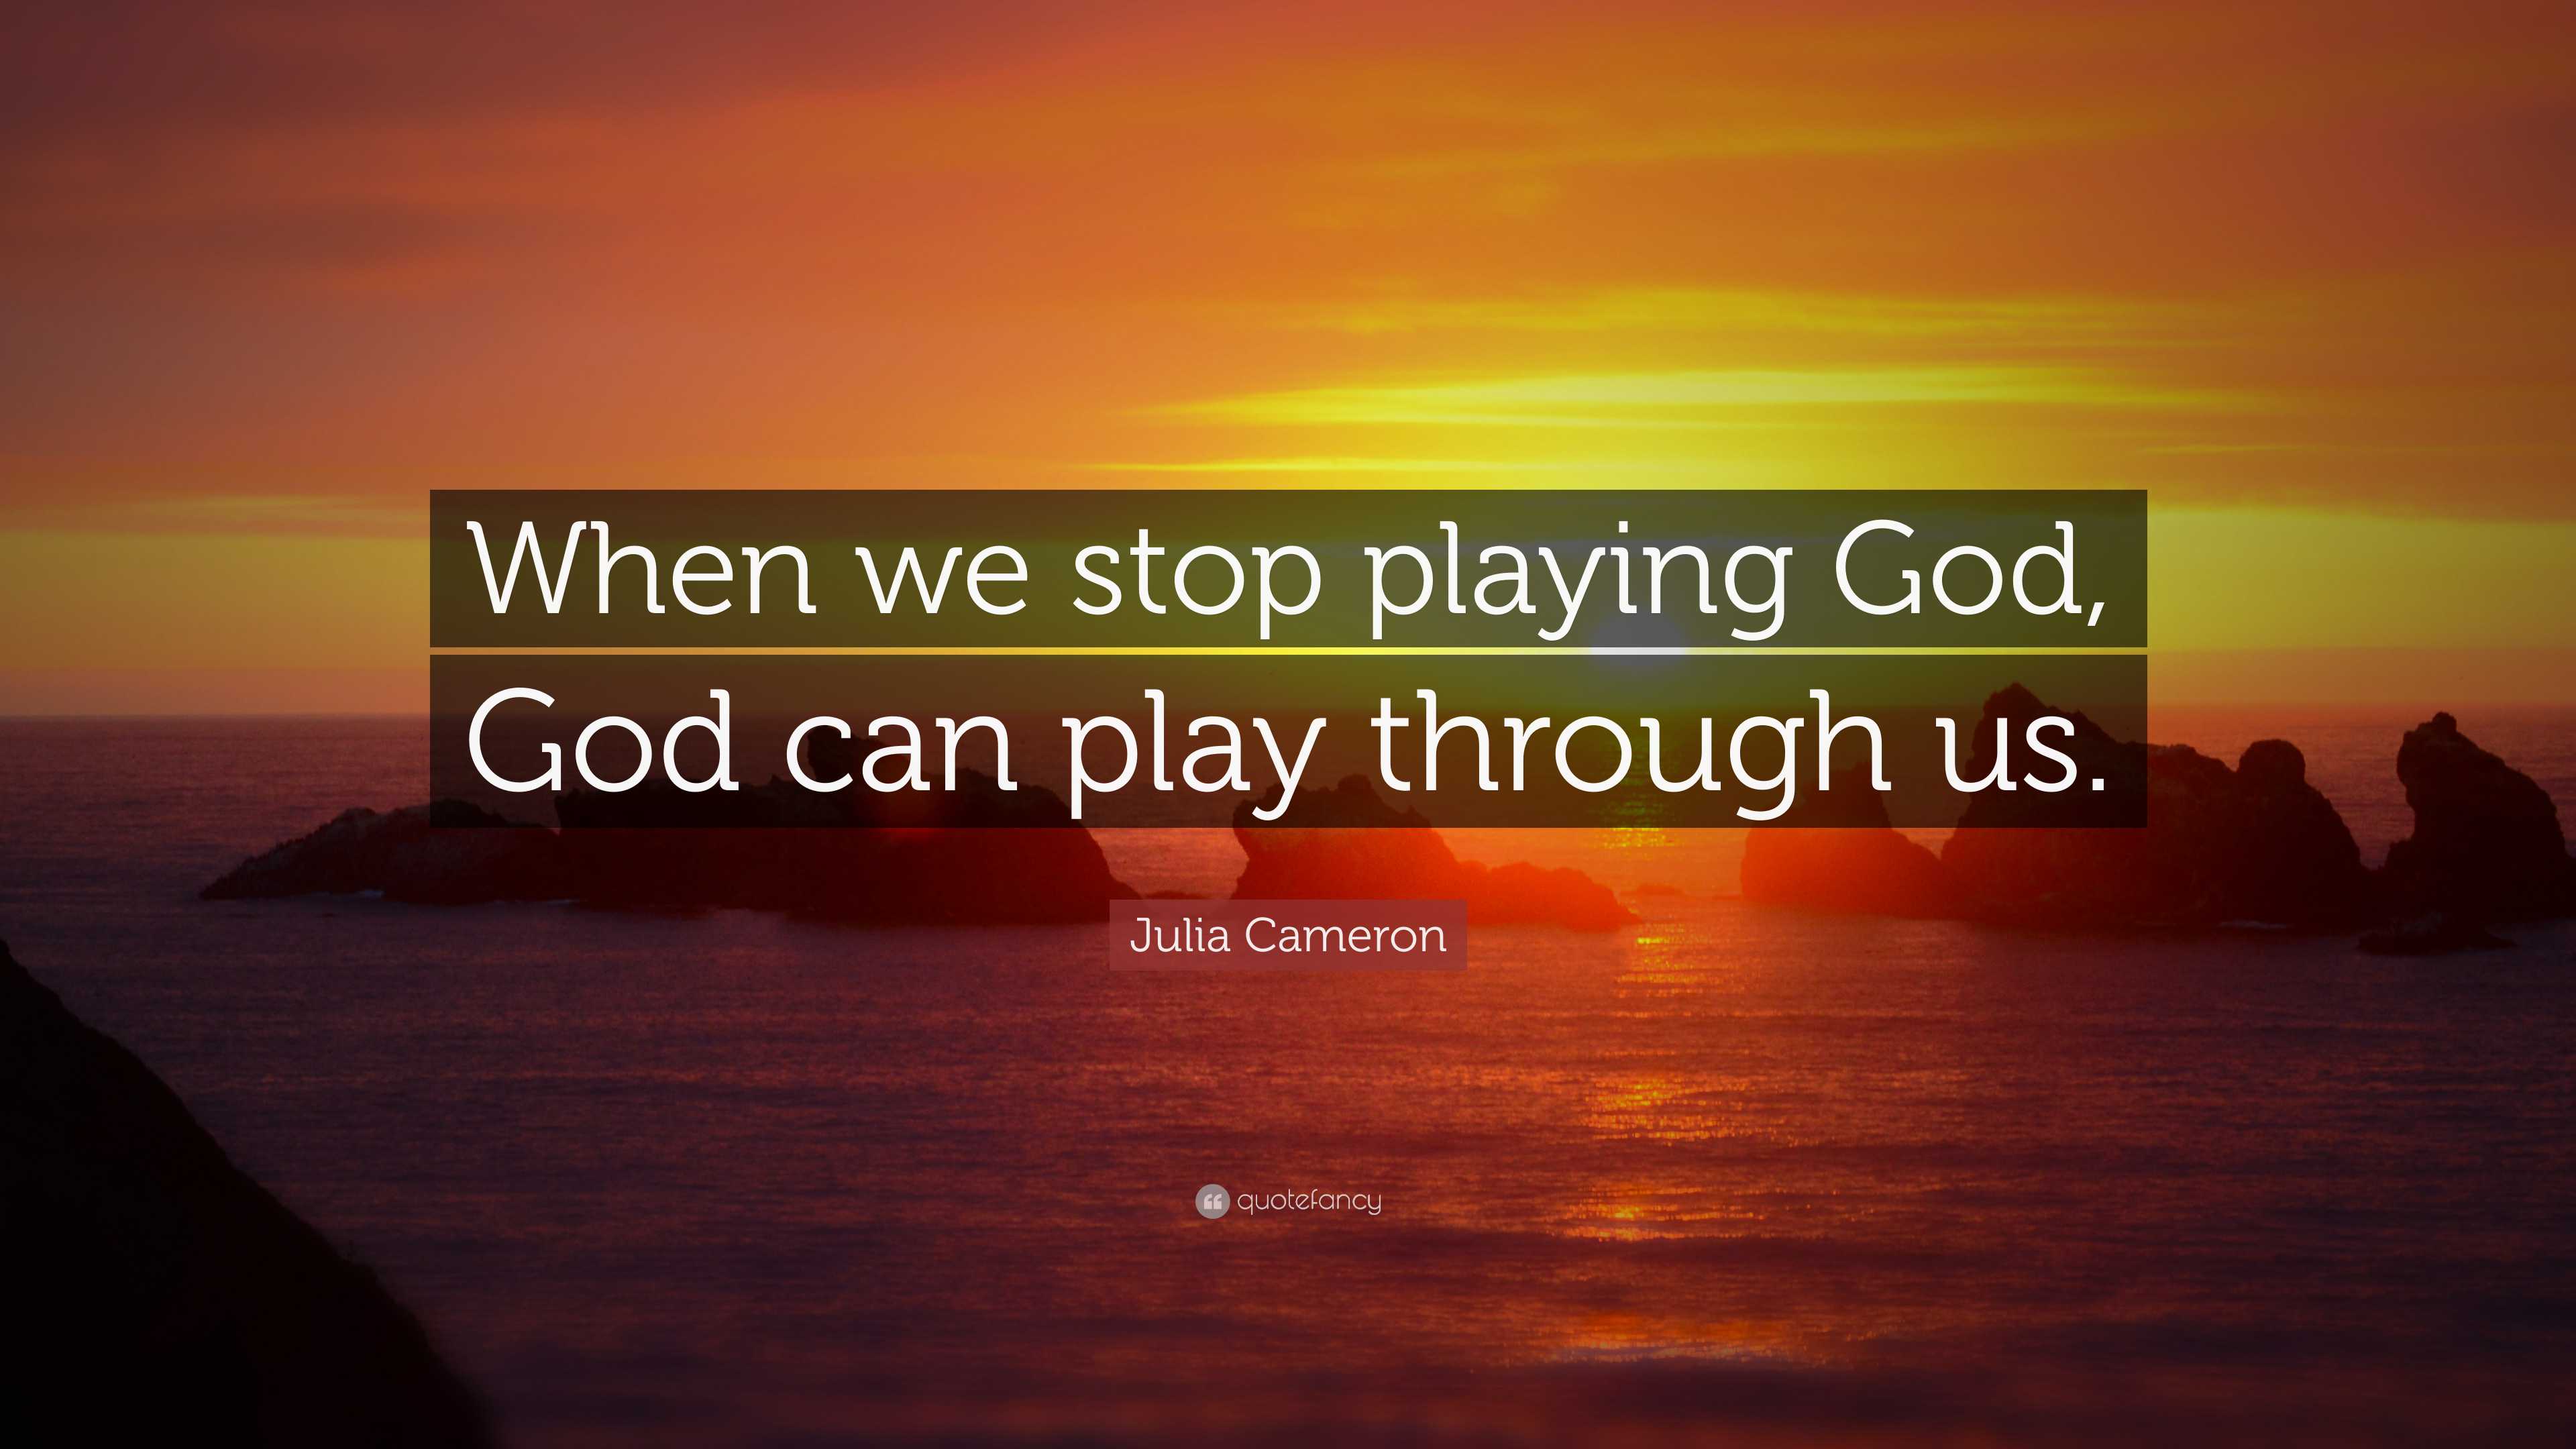 Julia Cameron Quote: “When we stop playing God, God can play